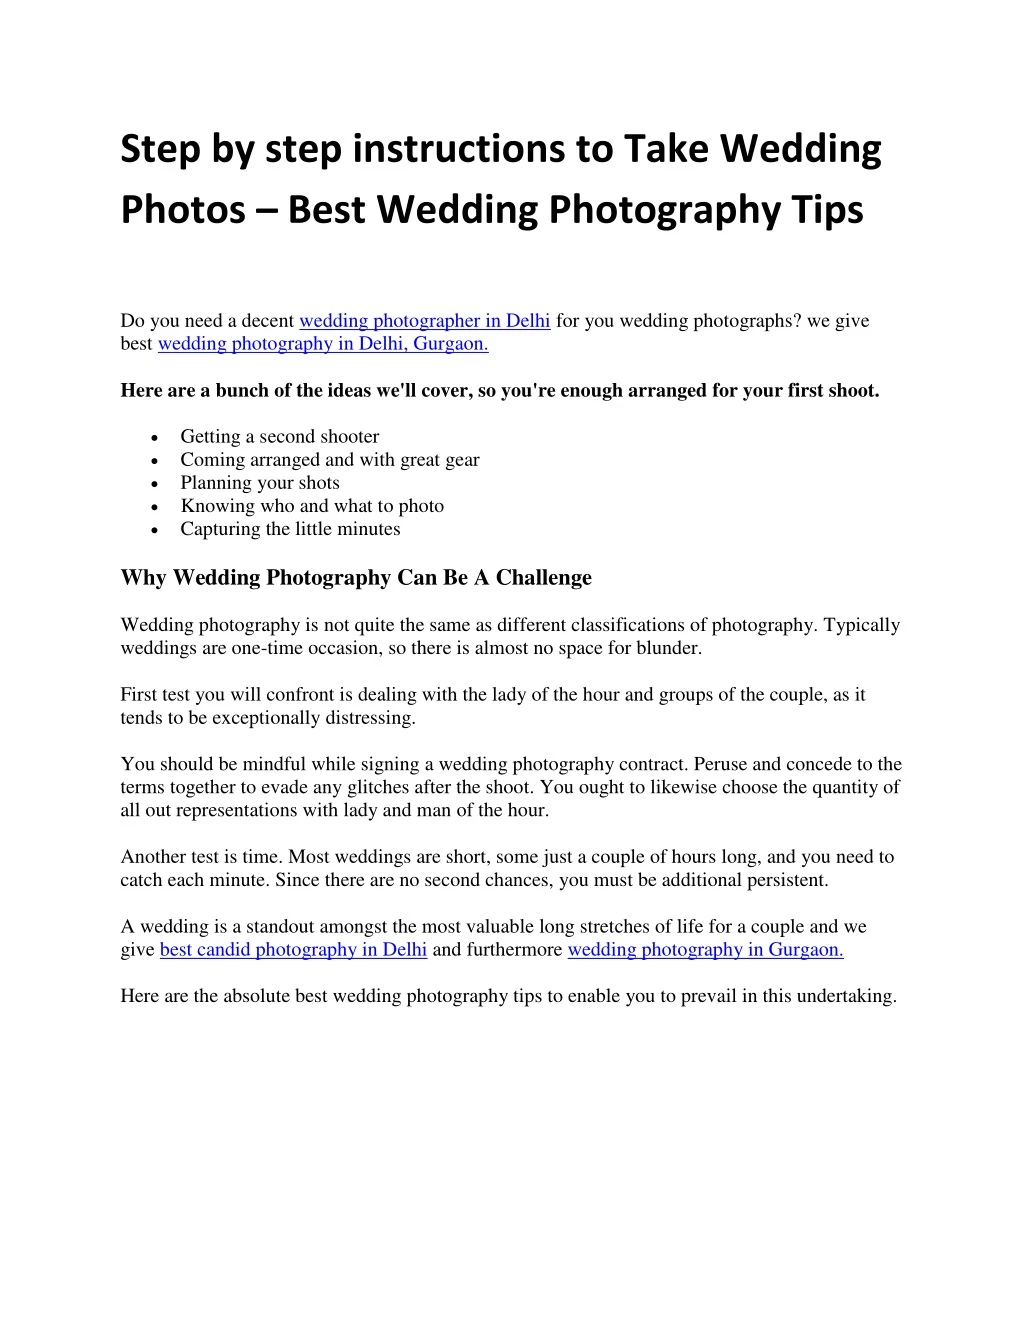 step by step instructions to take wedding photos